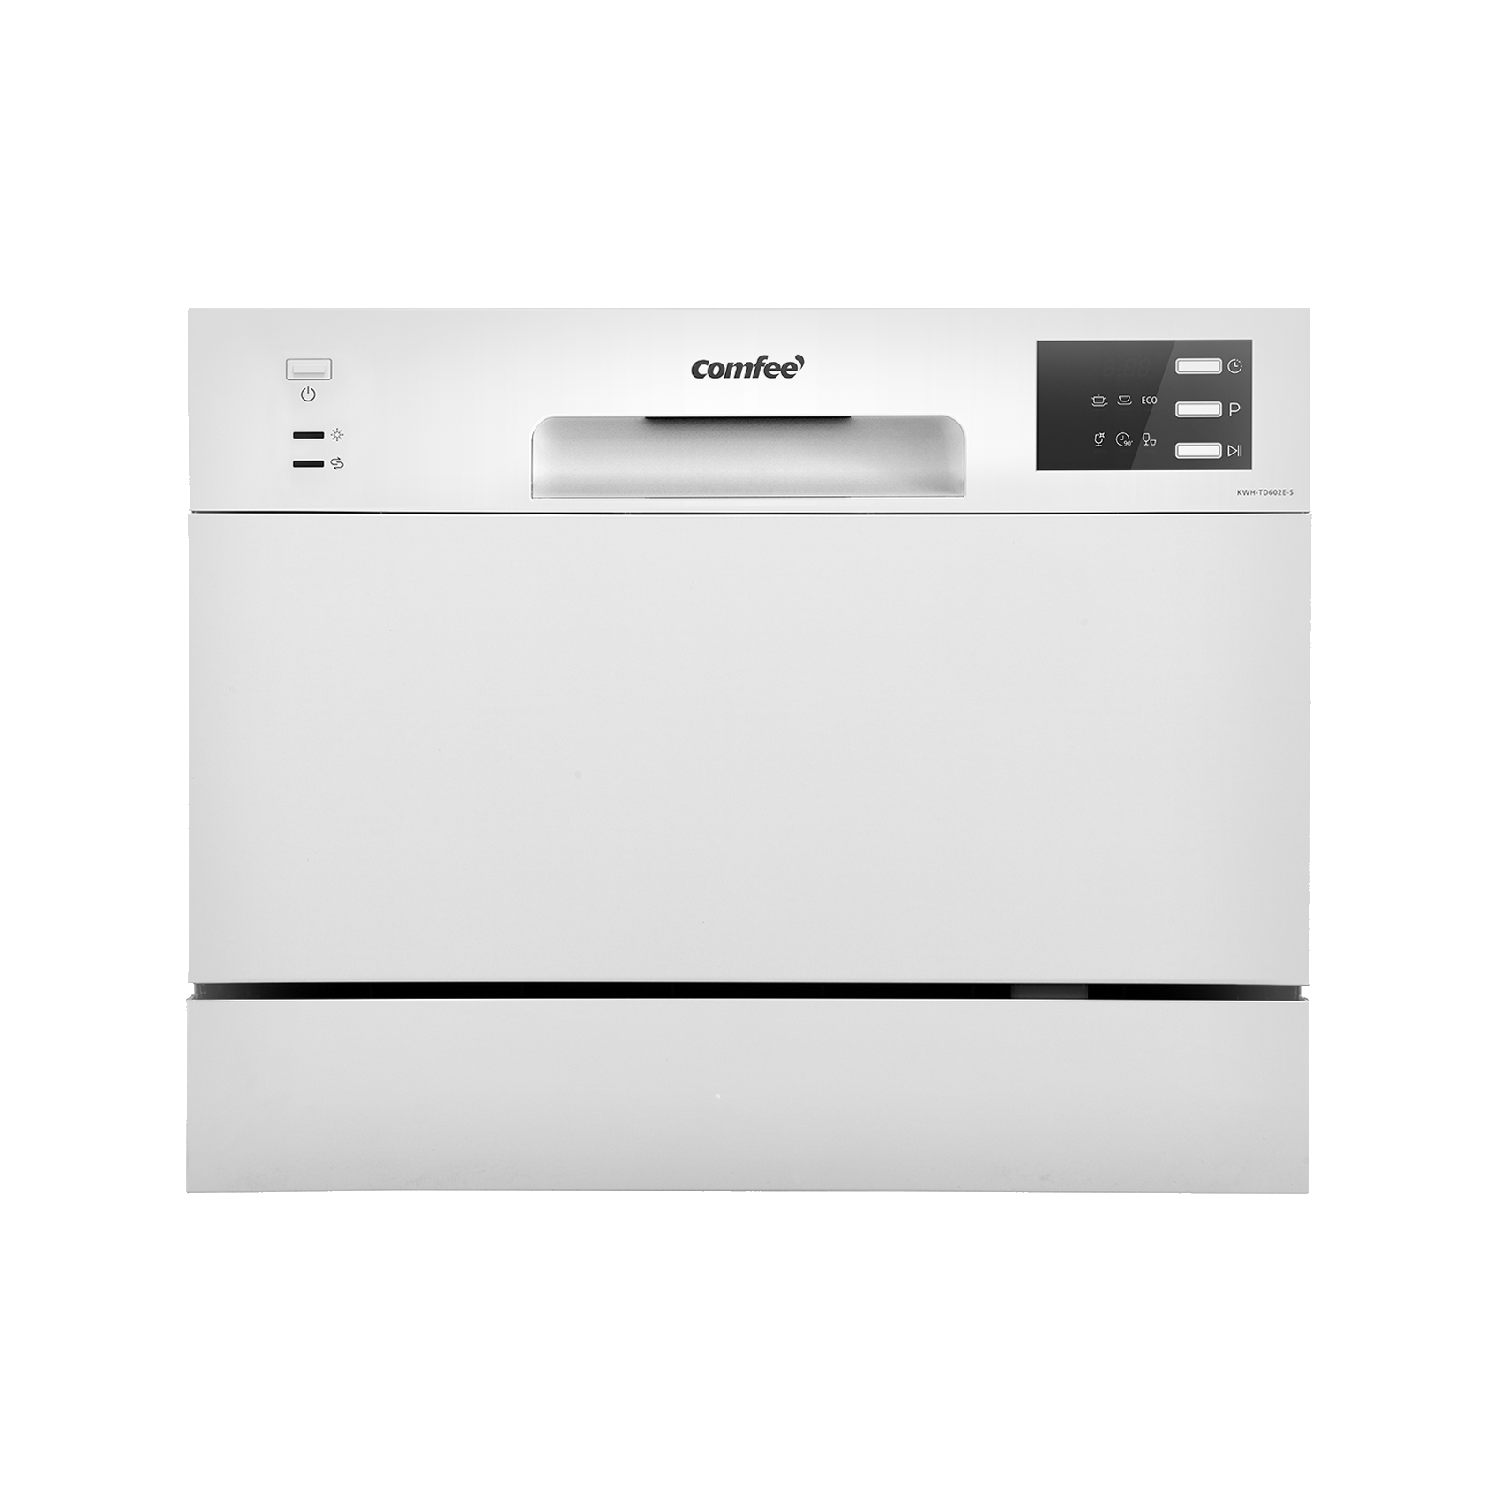 COMFEE' Countertop Dishwasher, Energy Star Portable Dishwasher, 6 Place  Settings - Helia Beer Co